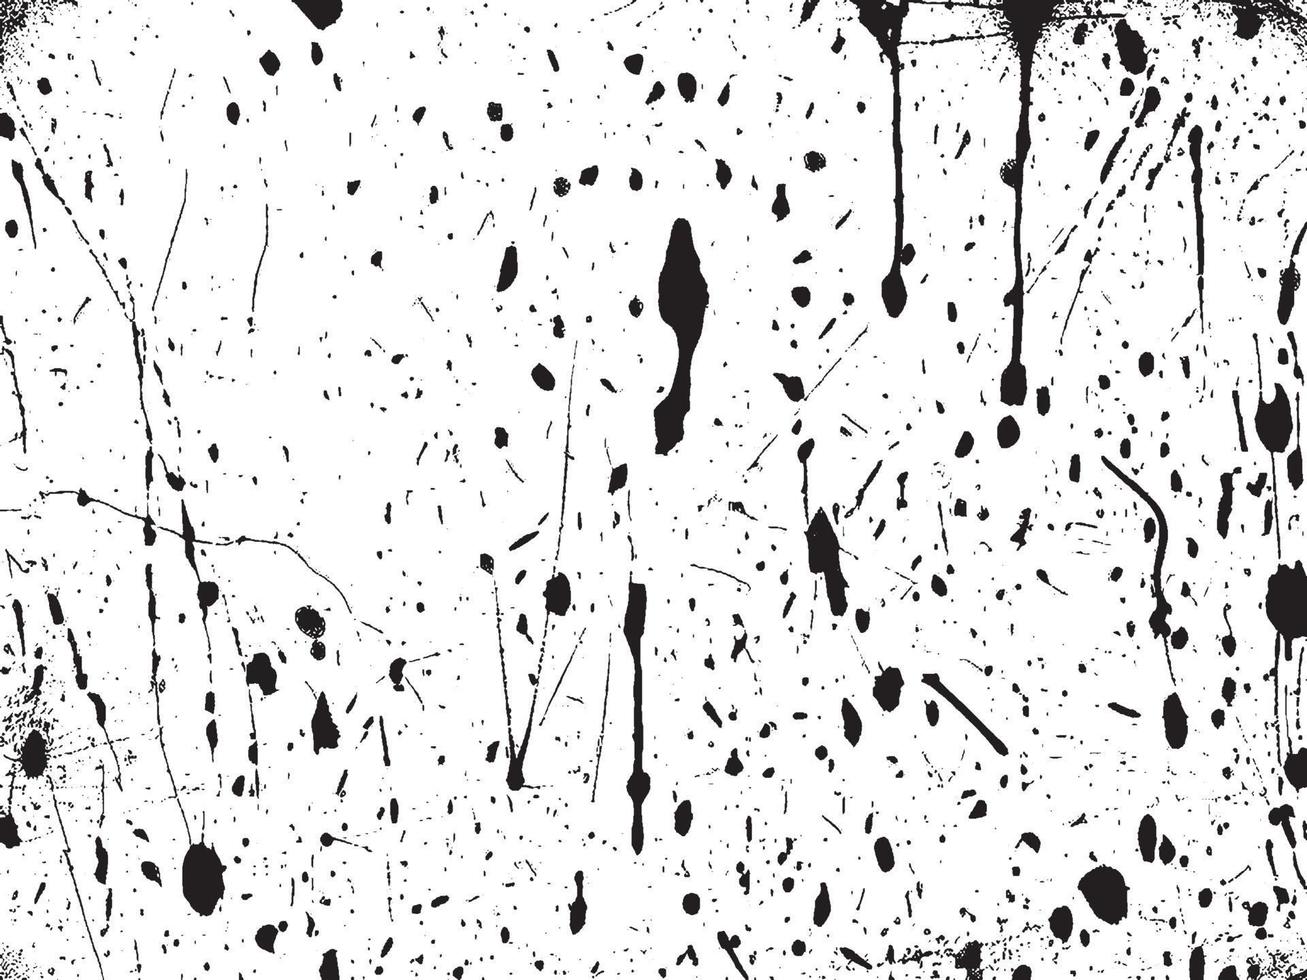 Grunge Black and White Distressed Texture. Vector EPS 10.